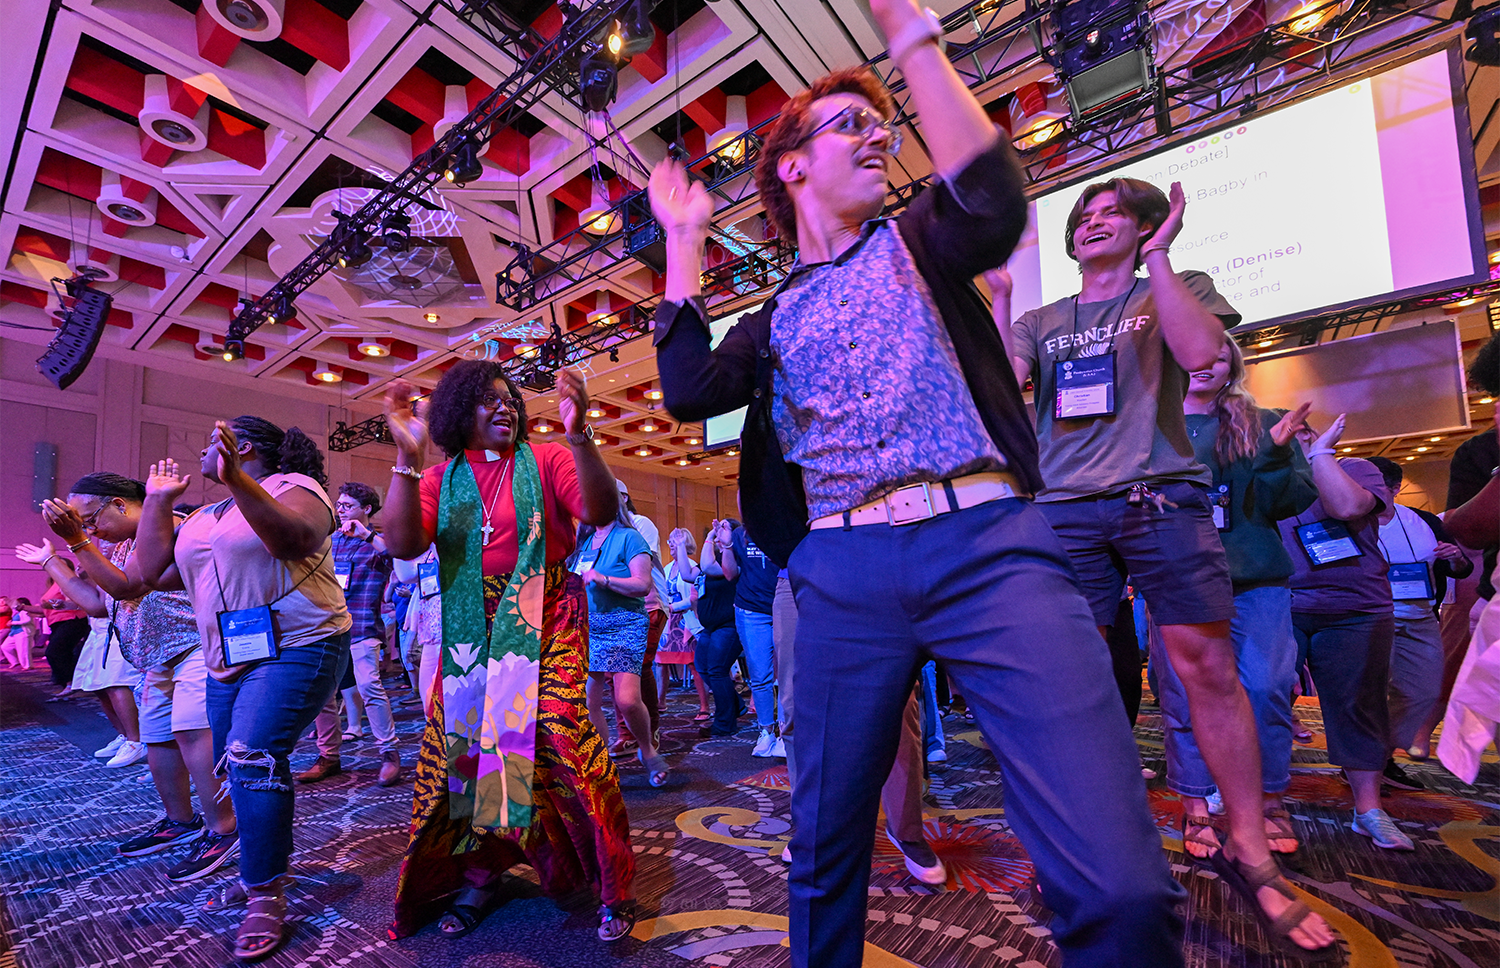 The Rev. CeCe Armstrong, co-moderator of the 226th General Assembly and Commissioner Dustin Wilsor join commissioners and advisory delegates in a dance break during Tuesday night’s plenary at the 226th General Assembly. Photo by Rich Copley